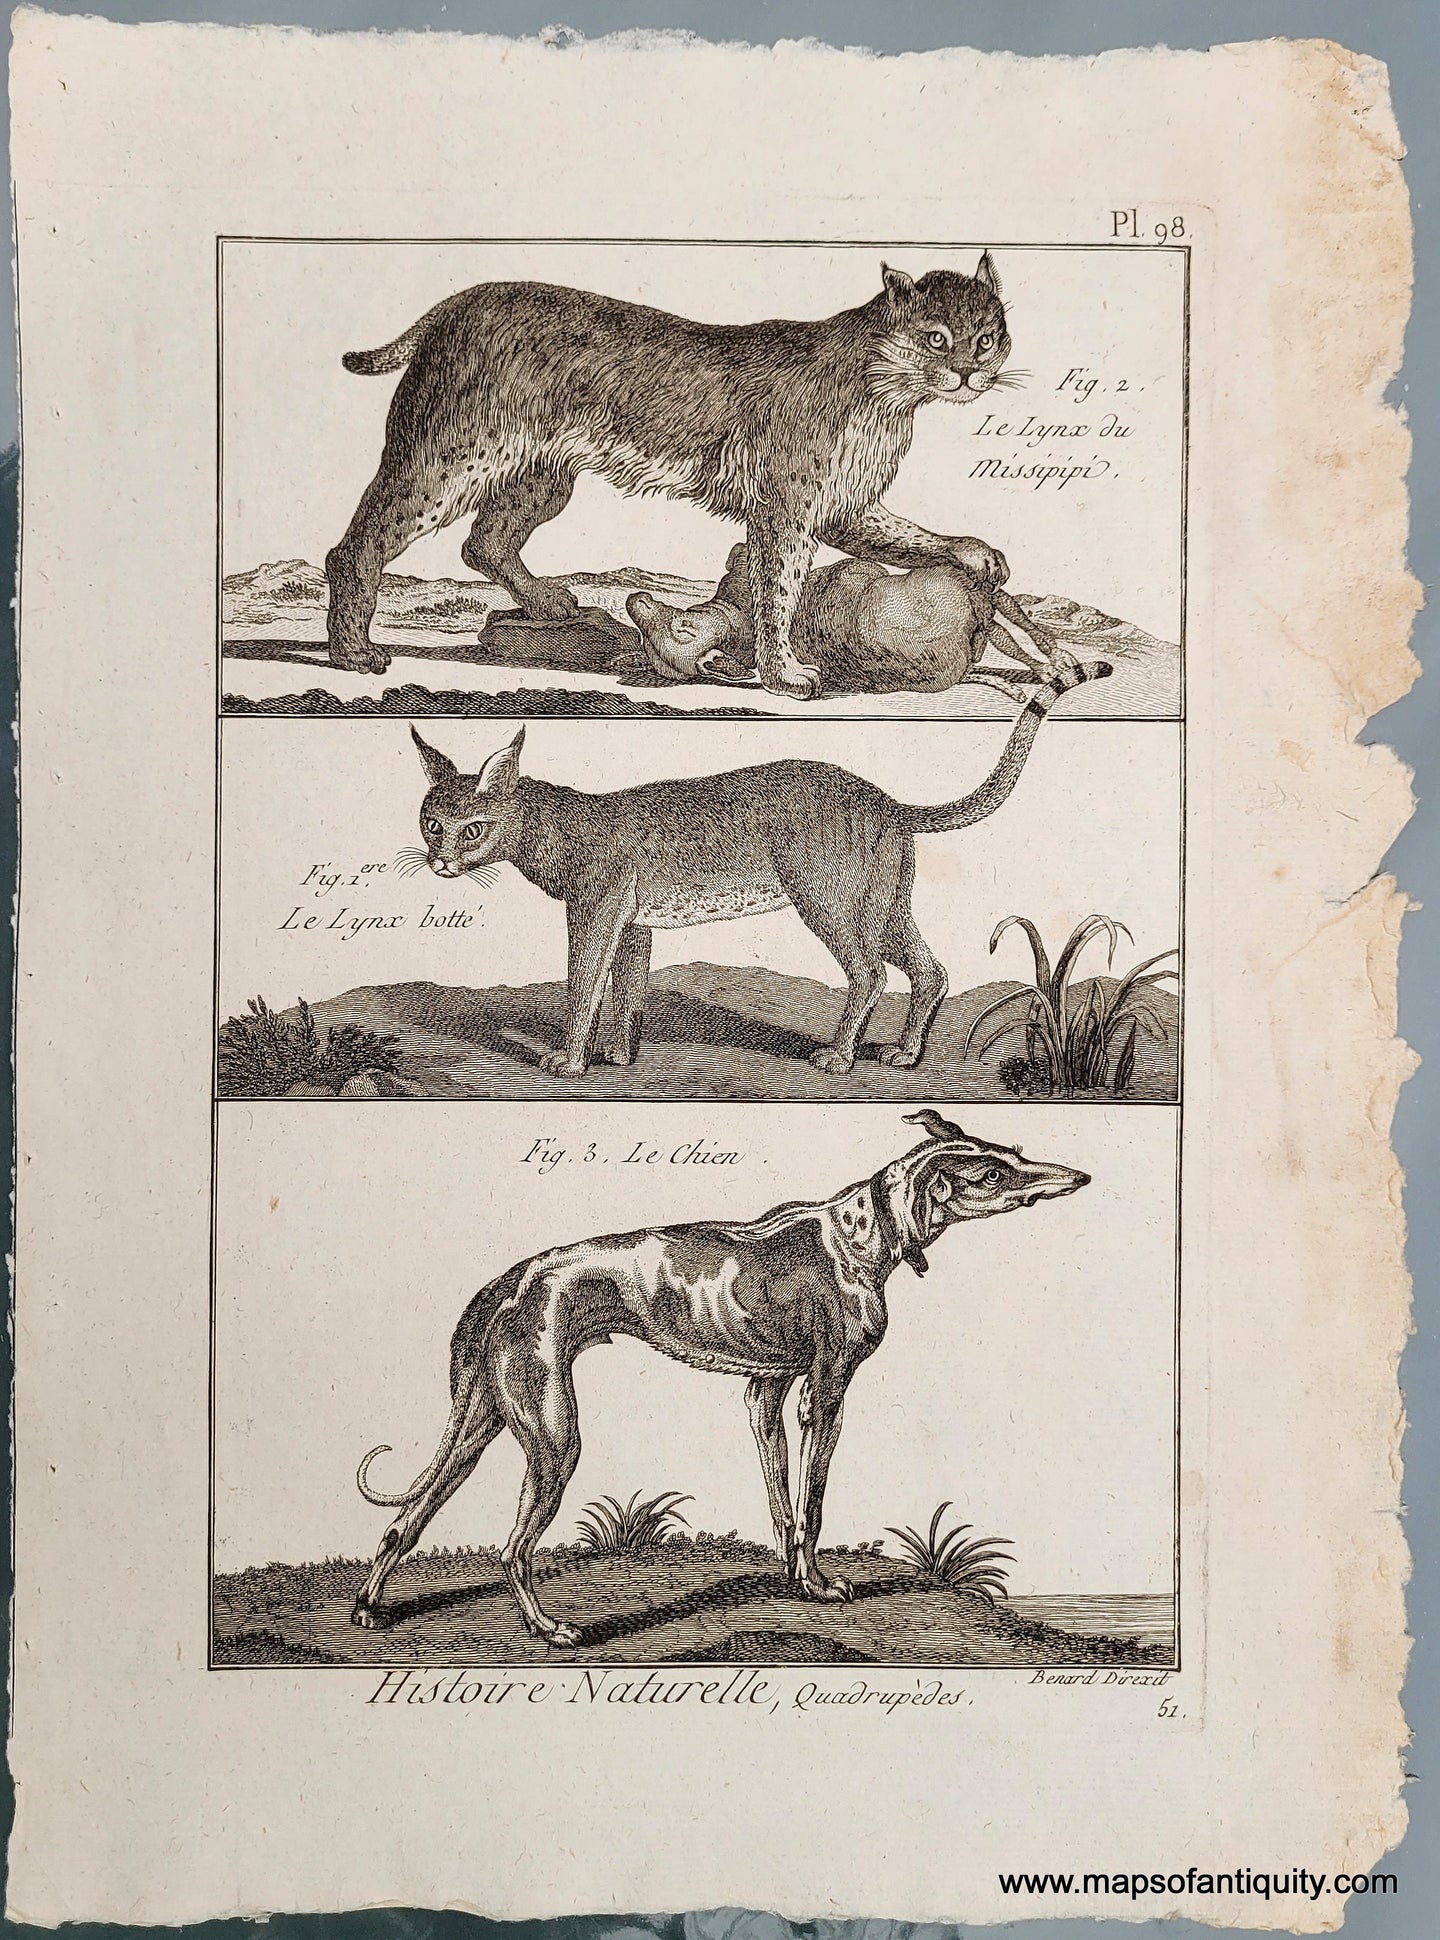 Genuine-Antique-Print-Antique-Large-Cats-and-Dog-Print-1800-Benard-Direxit-Maps-Of-Antiquity